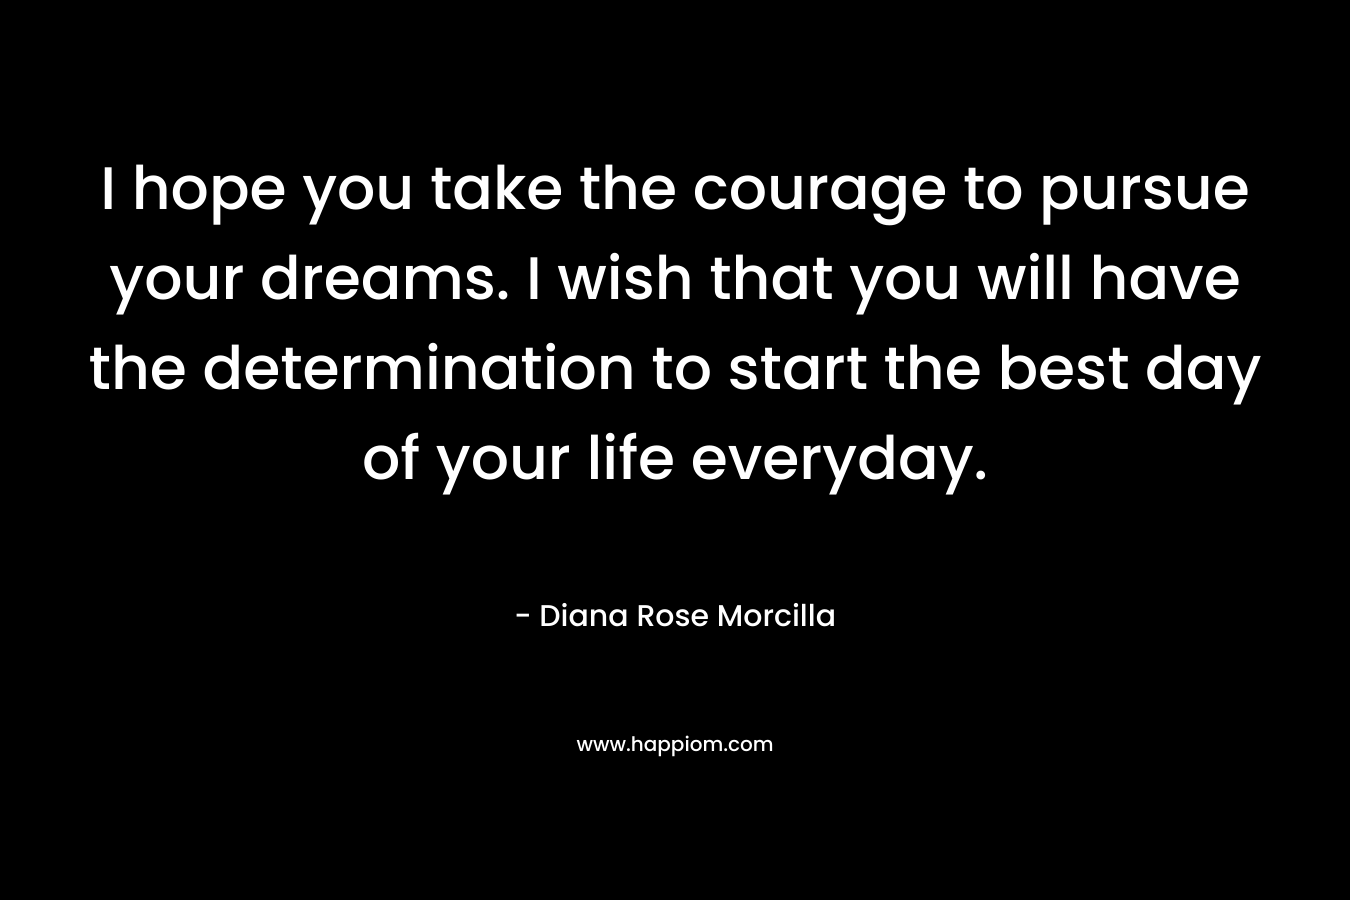 I hope you take the courage to pursue your dreams. I wish that you will have the determination to start the best day of your life everyday. – Diana Rose Morcilla